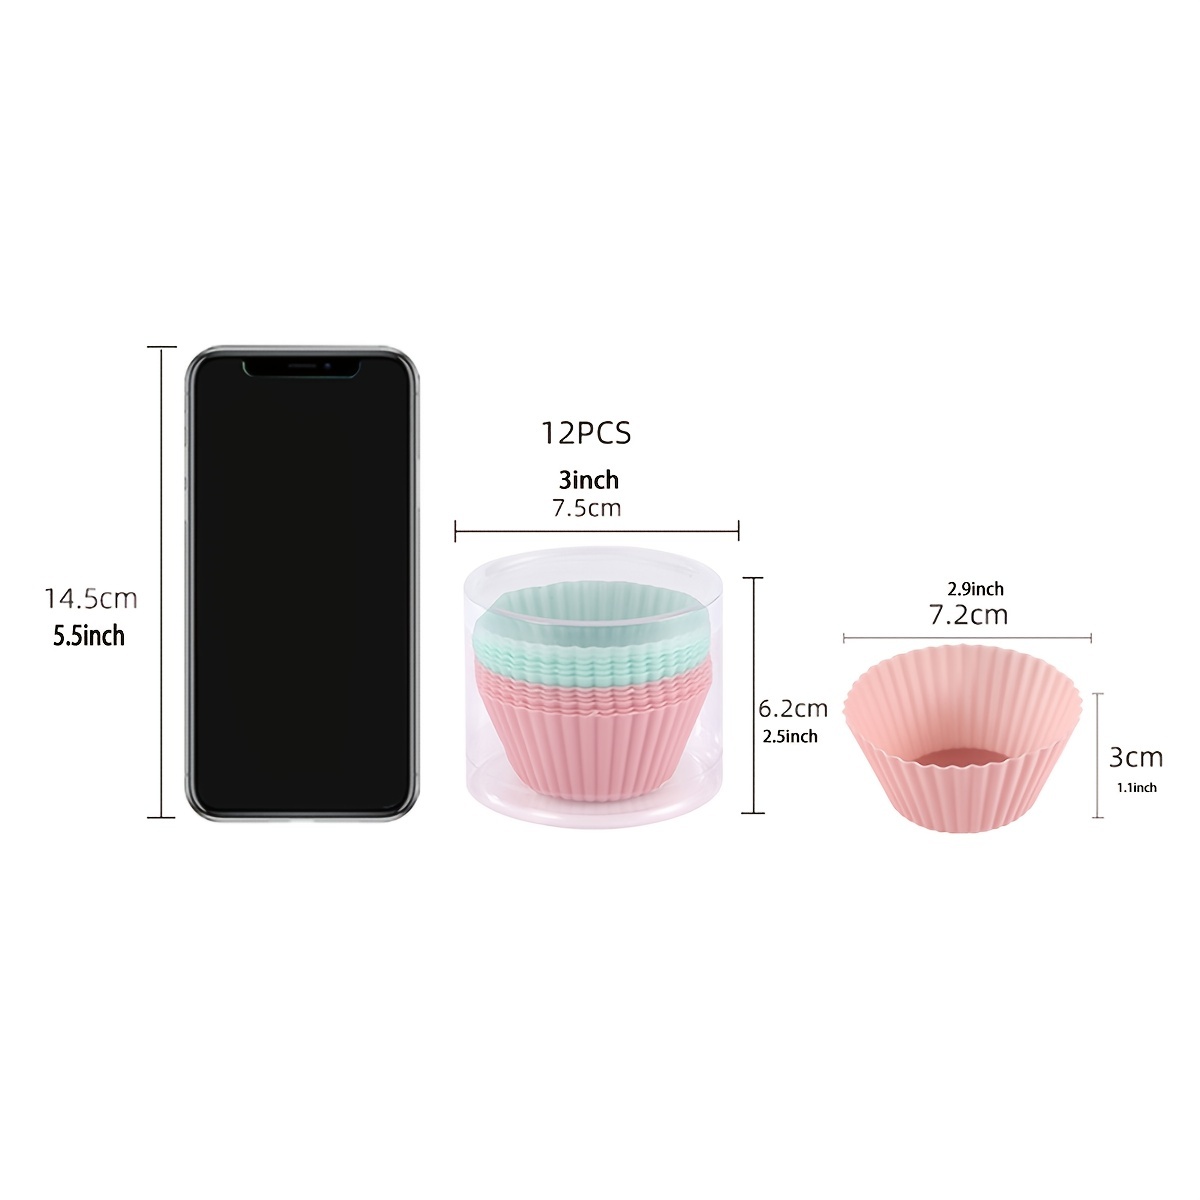 Reusable Silicone Cupcake Baking Cups 24 Pack, 275 inch Silicone Baking Cups, Reusable & Non-Stick Muffin Cupcake Liners for Party Halloween Christmas